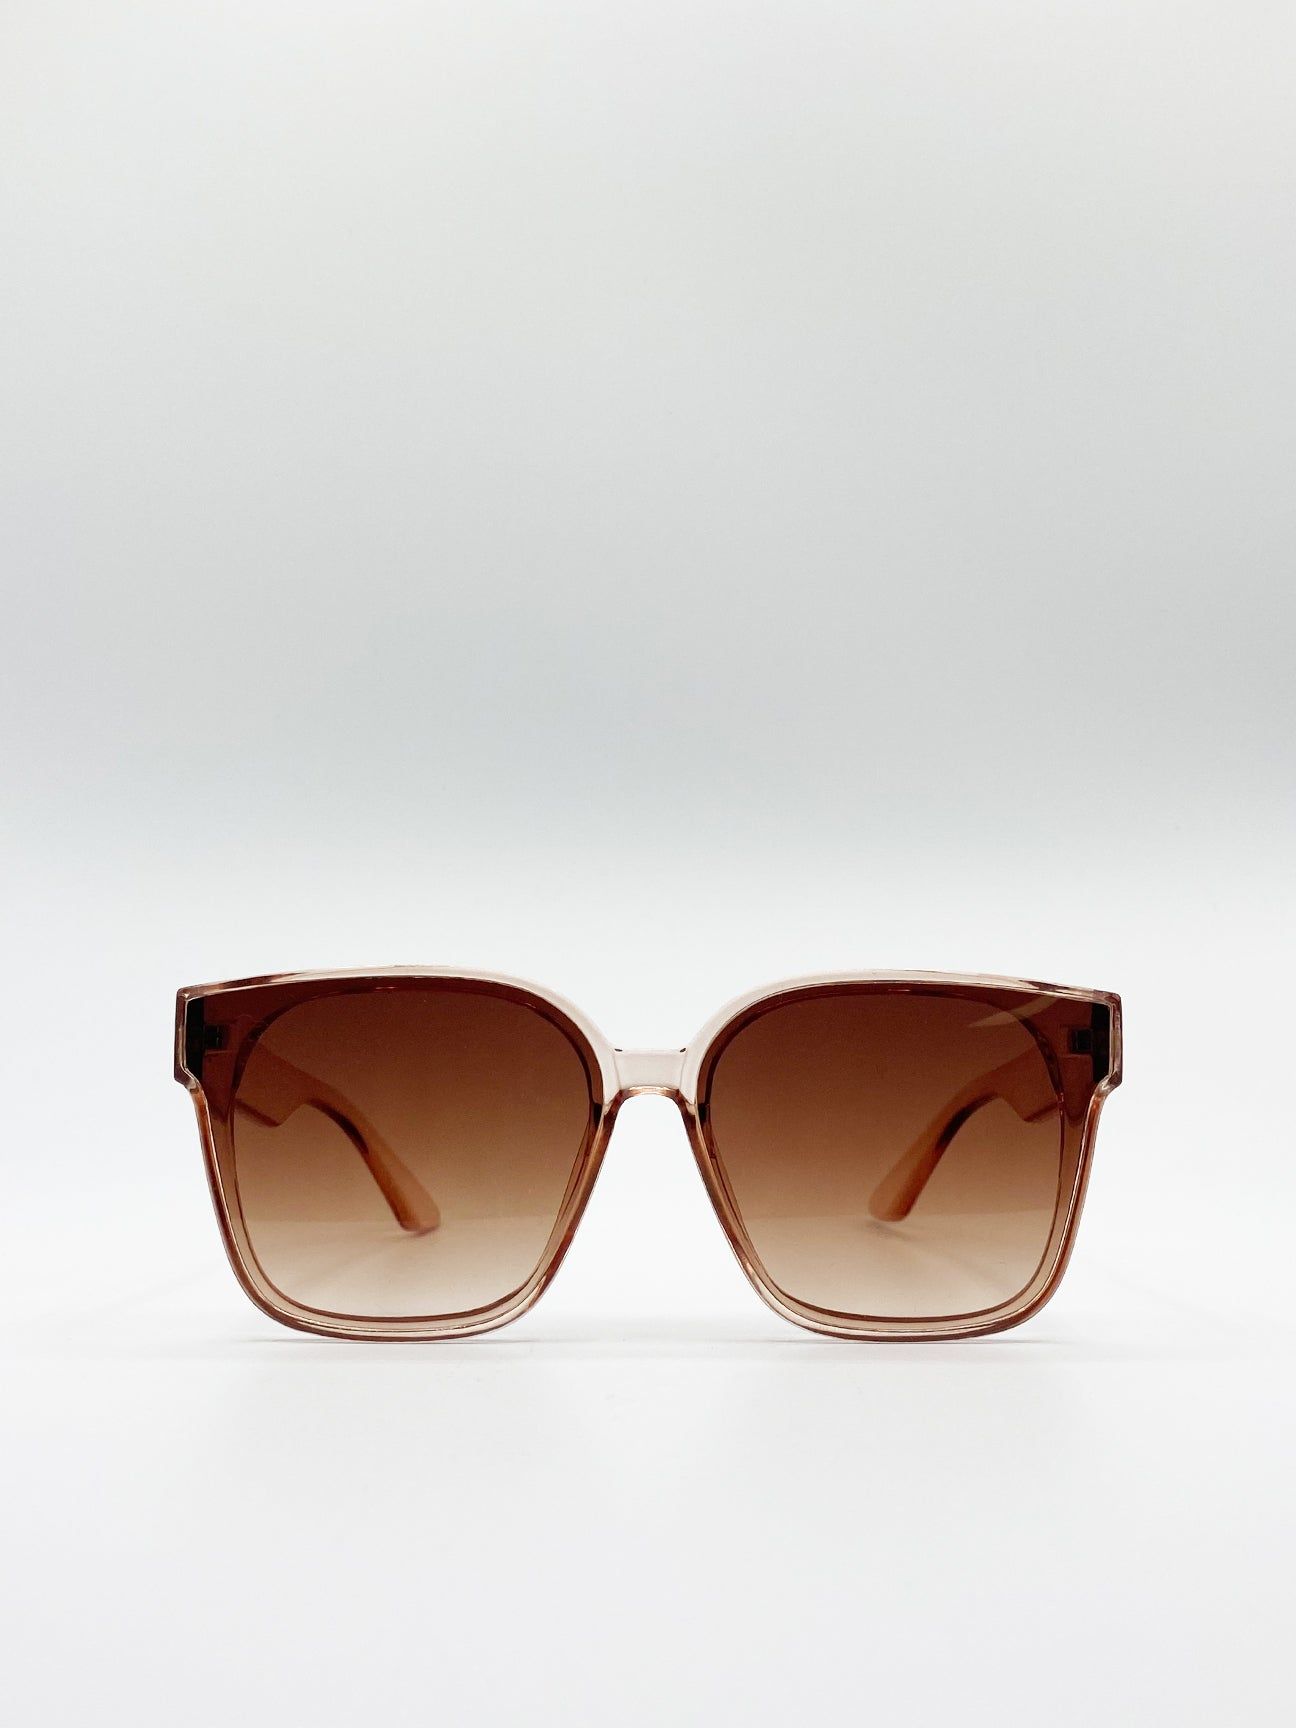 Oversized Cateye Sunglasses In Crystal Sand
Frame Colour: Crystal Sand
Lens Colour: Brown Grad
Frame Material: Plastic
One Size
FDA Approved
UV 400 PROTECTION IN ACCORDANCE WITH 89/686/EEC BS EN ISO 123-1:2013
SKU: SG80207190